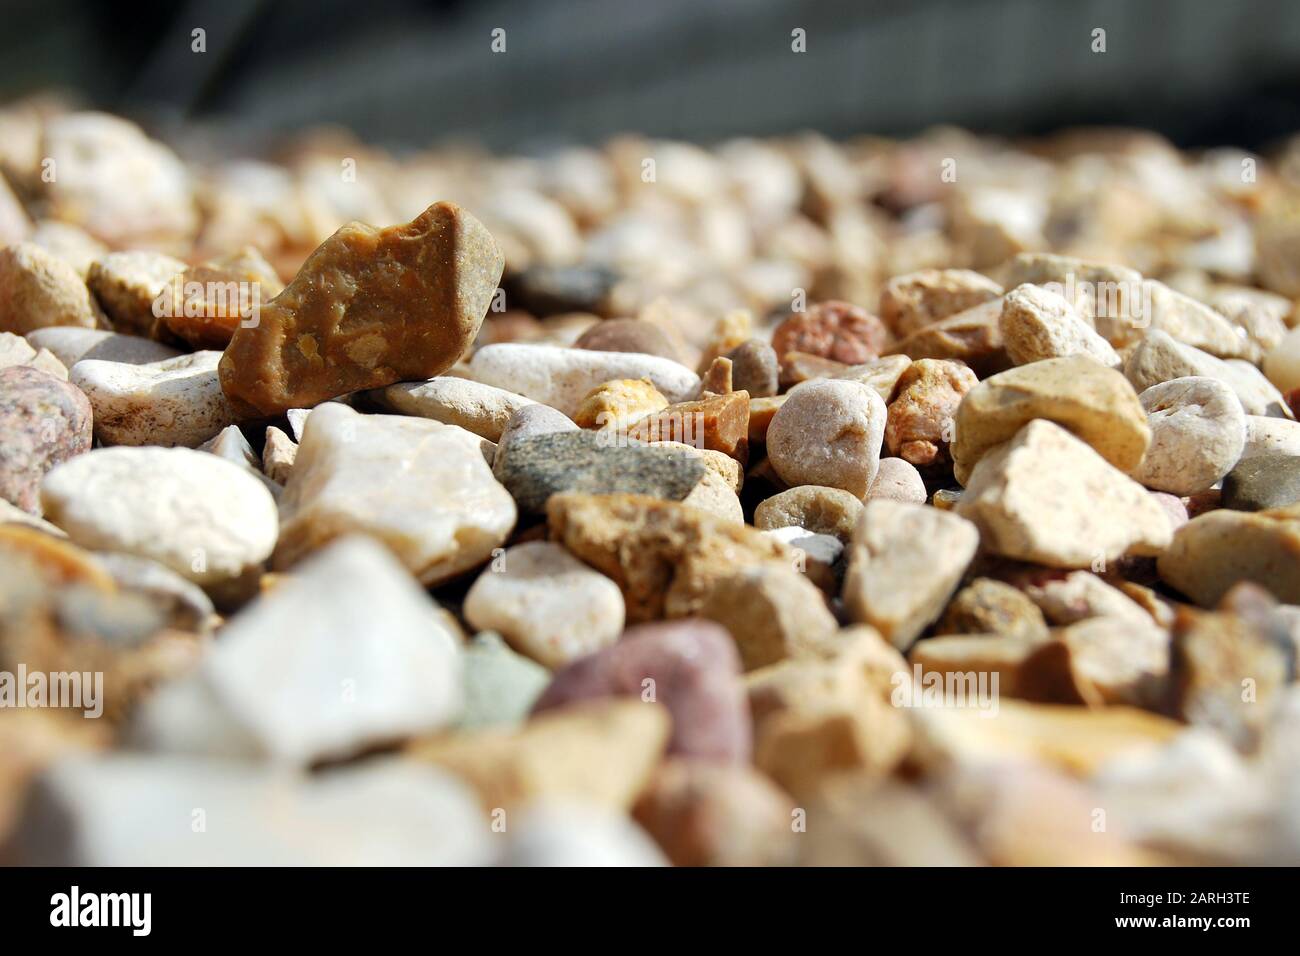 Small stones, gravel or pebbles close up from ow angle with perspective view Stock Photo